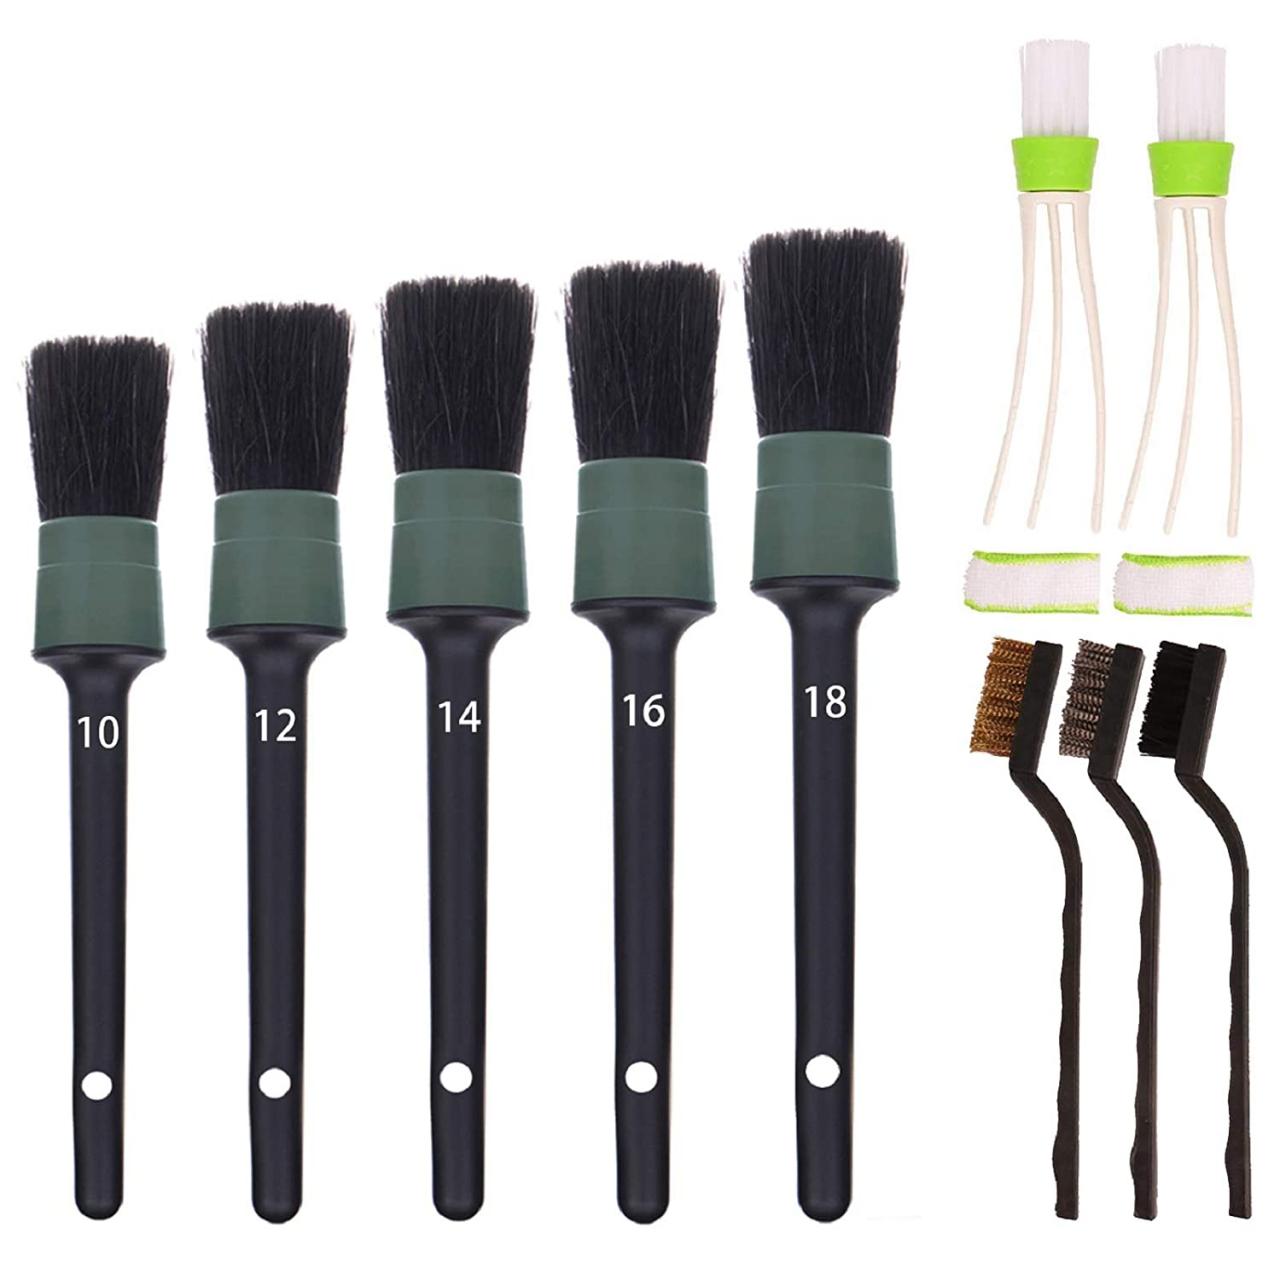 LIFE Direct SUBANG 11 Pieces Car Detailing Brush Set for Cleaning  Wheels,Interior,Exterior,Leather, Includes 6 Pcs Wooden Handle Boar Hair